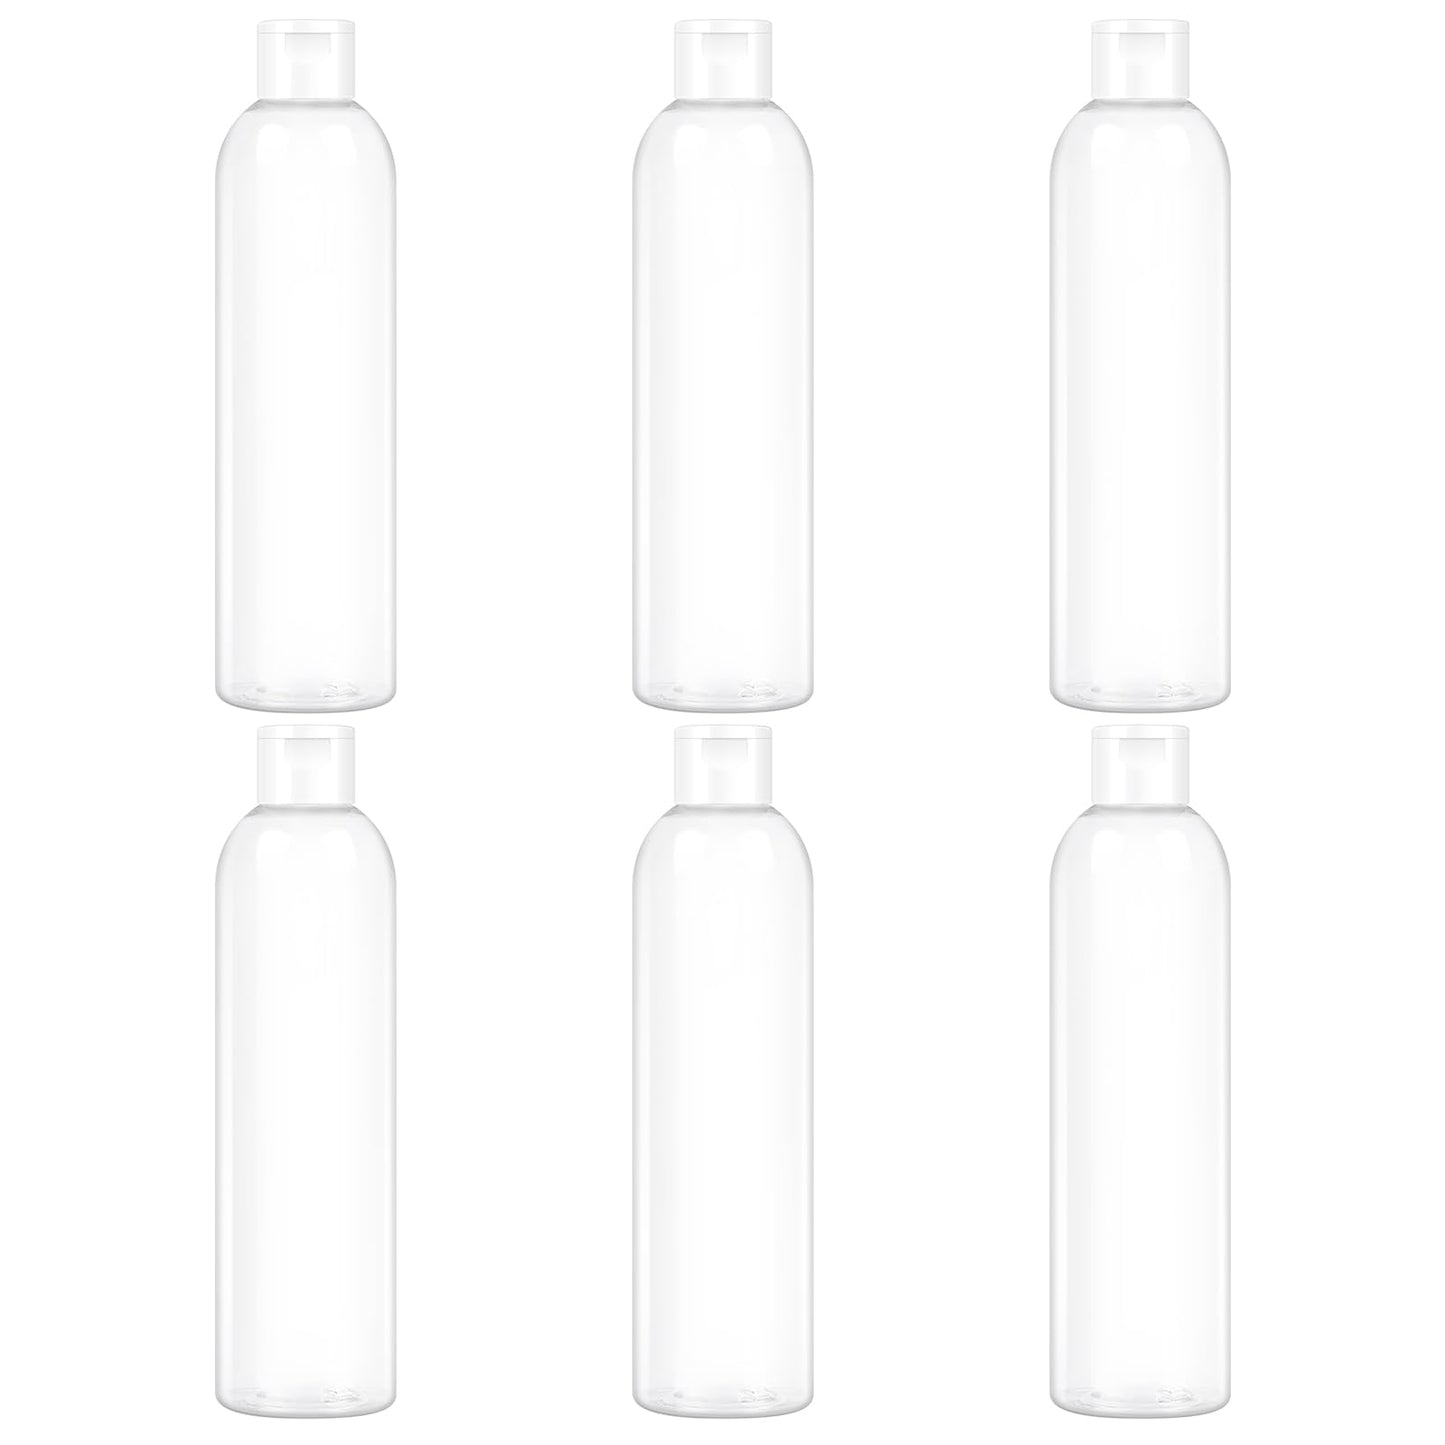 Neendohome 6 Pack 8oz Travel Squeeze Bottles with Flip Caps Refillable Empty Plastic Containers for Toiletries Shampoo Lotions Oils (250ml, Clear) 1